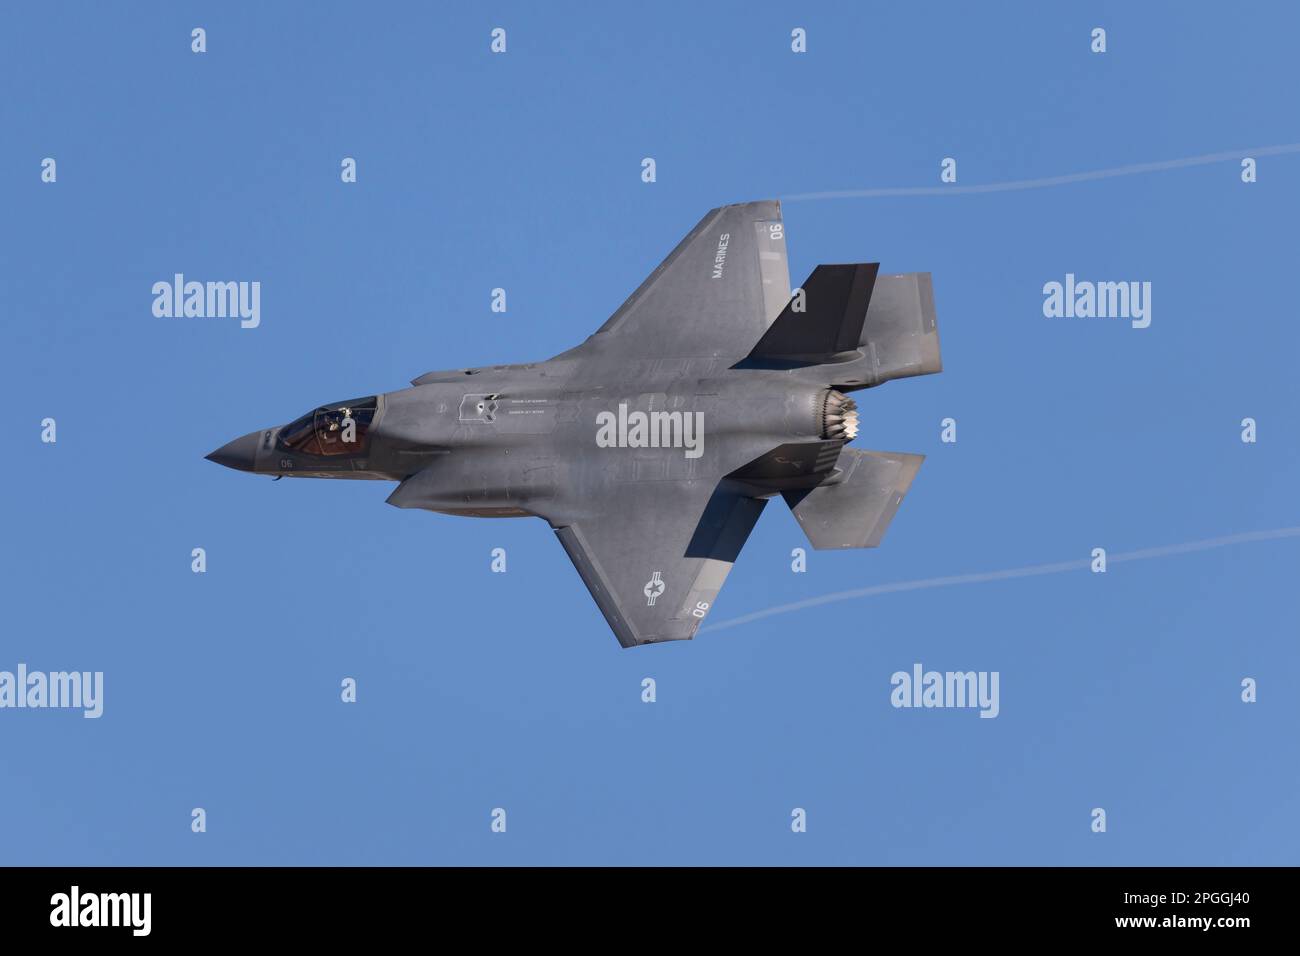 Las Vegas, NV - January 23, 2023: F-35 Fighter Jet Banks Left After Take-Off During the Red Flag 23-1 Exercise at Nellis AFB. Stock Photo